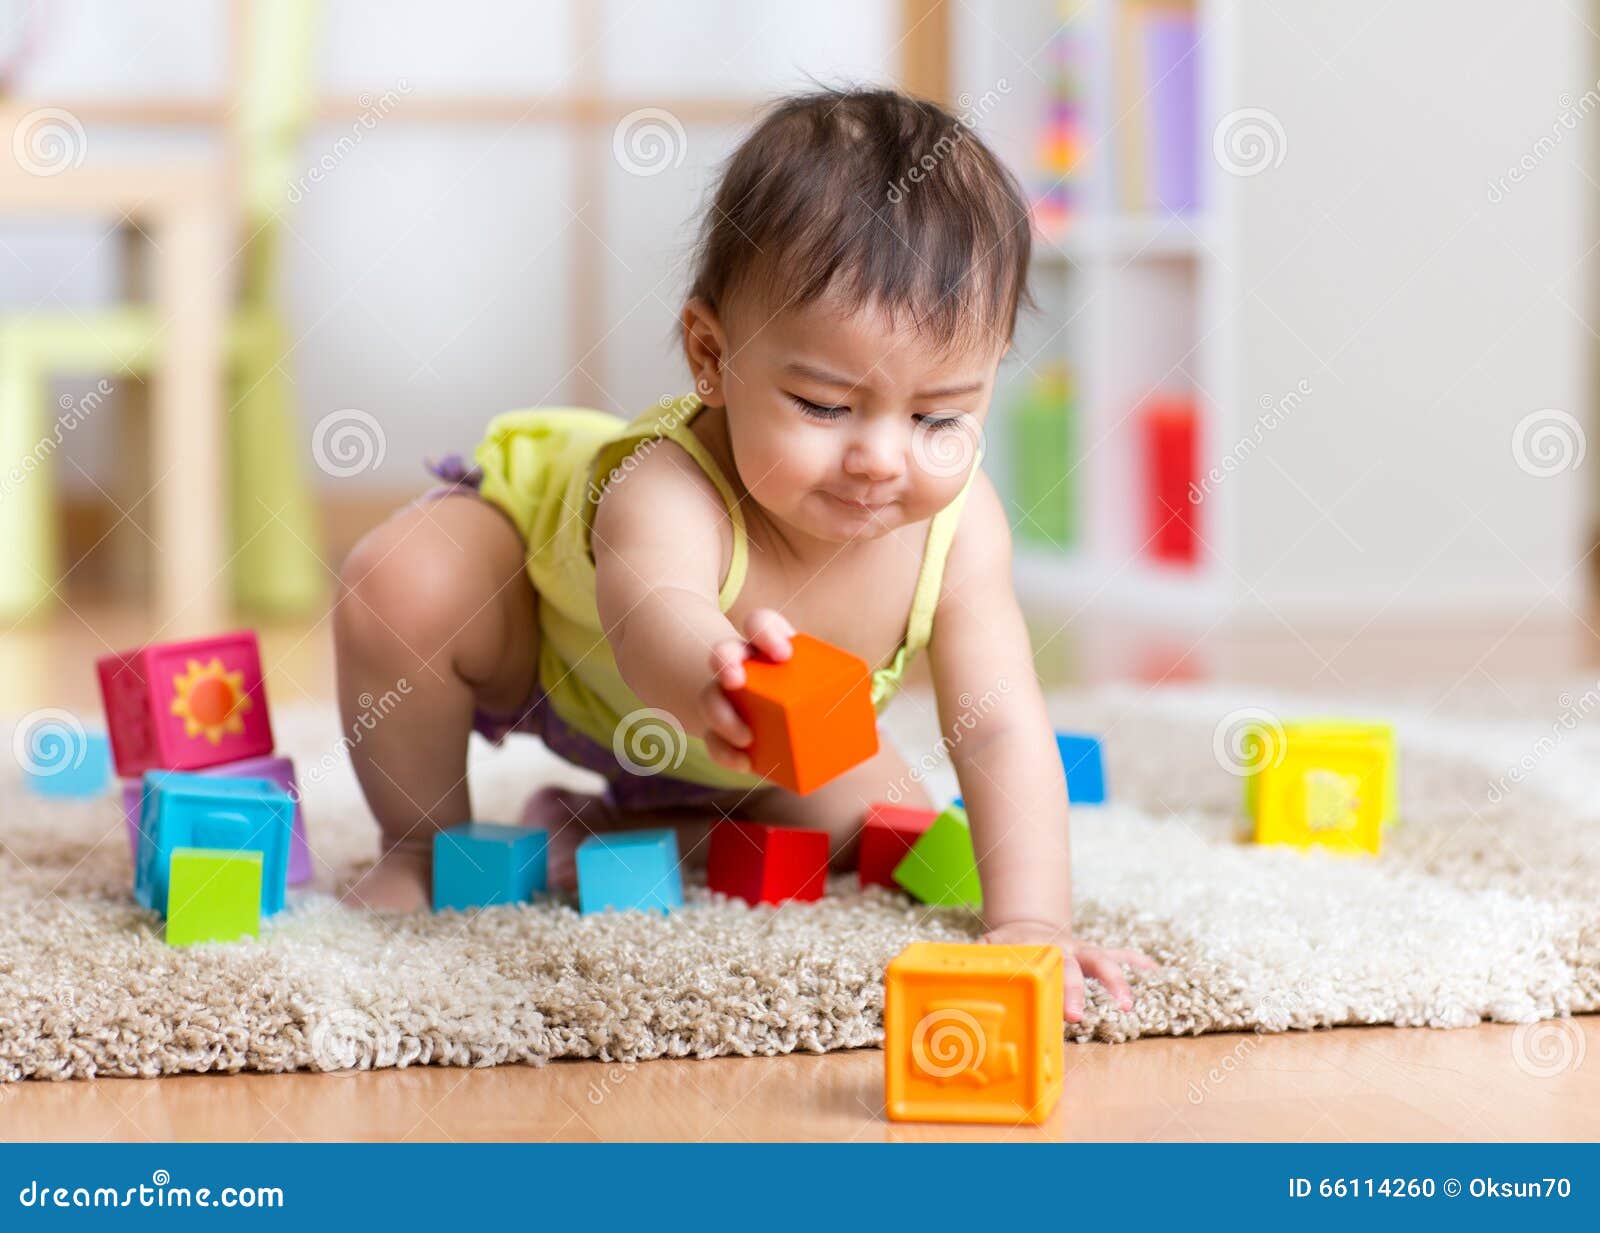 Baby Toddler Playing Wooden Toys At Home Or Nursery Stock ...